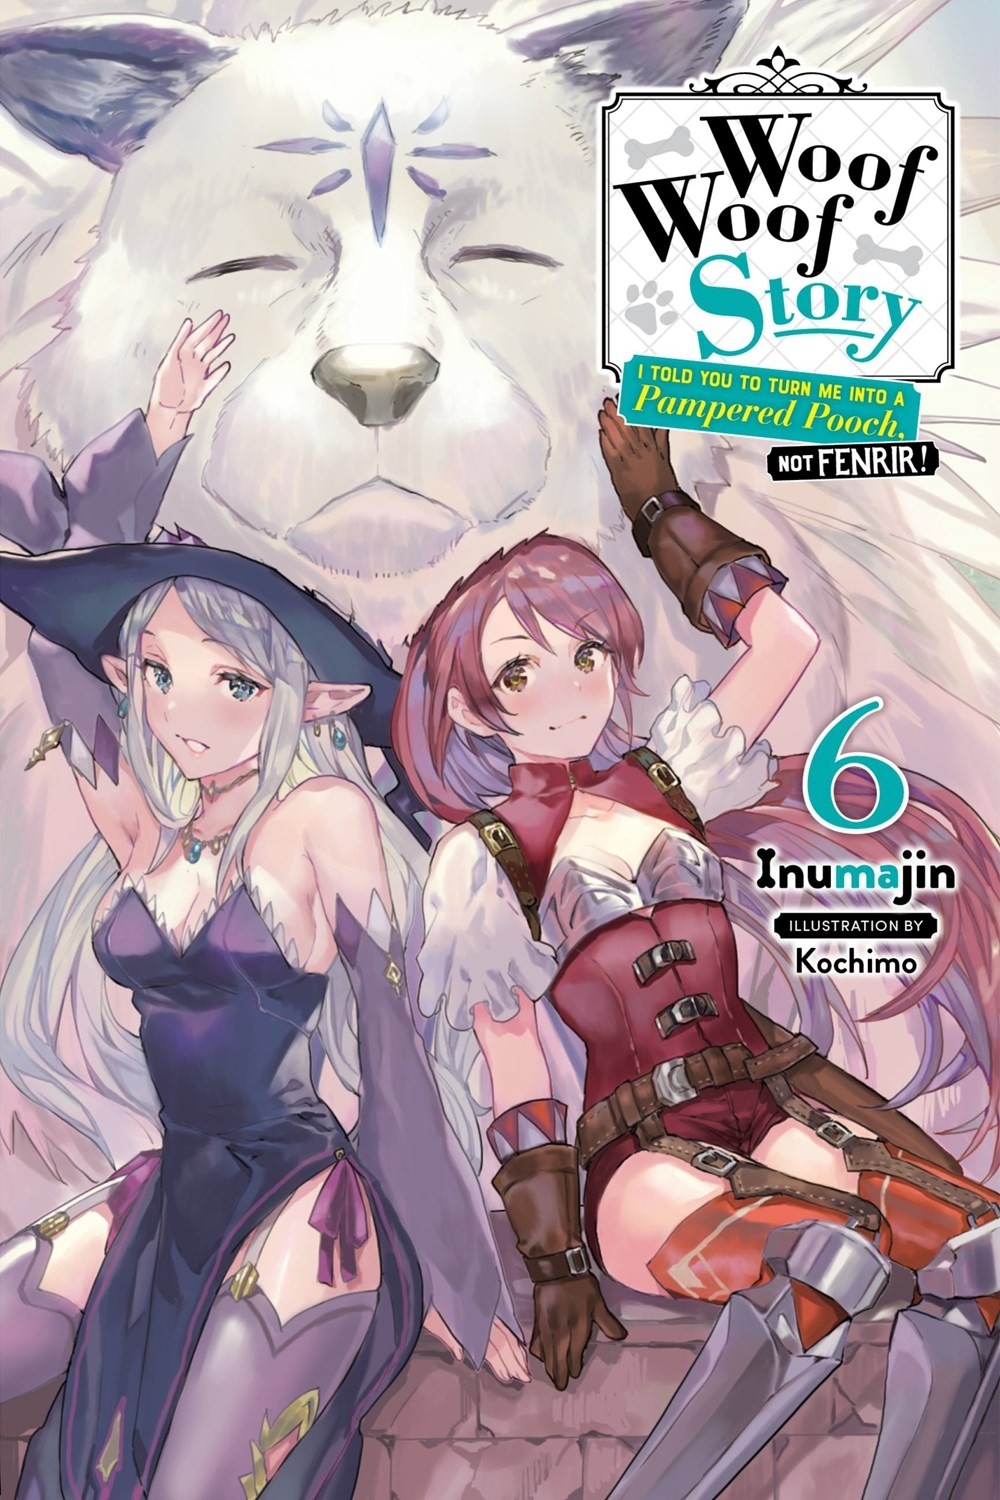 Woof Woof Story: I Told You to Turn Me Into a Pampered Pooch, Not Fenrir!, (Light Novel) Vol. 06